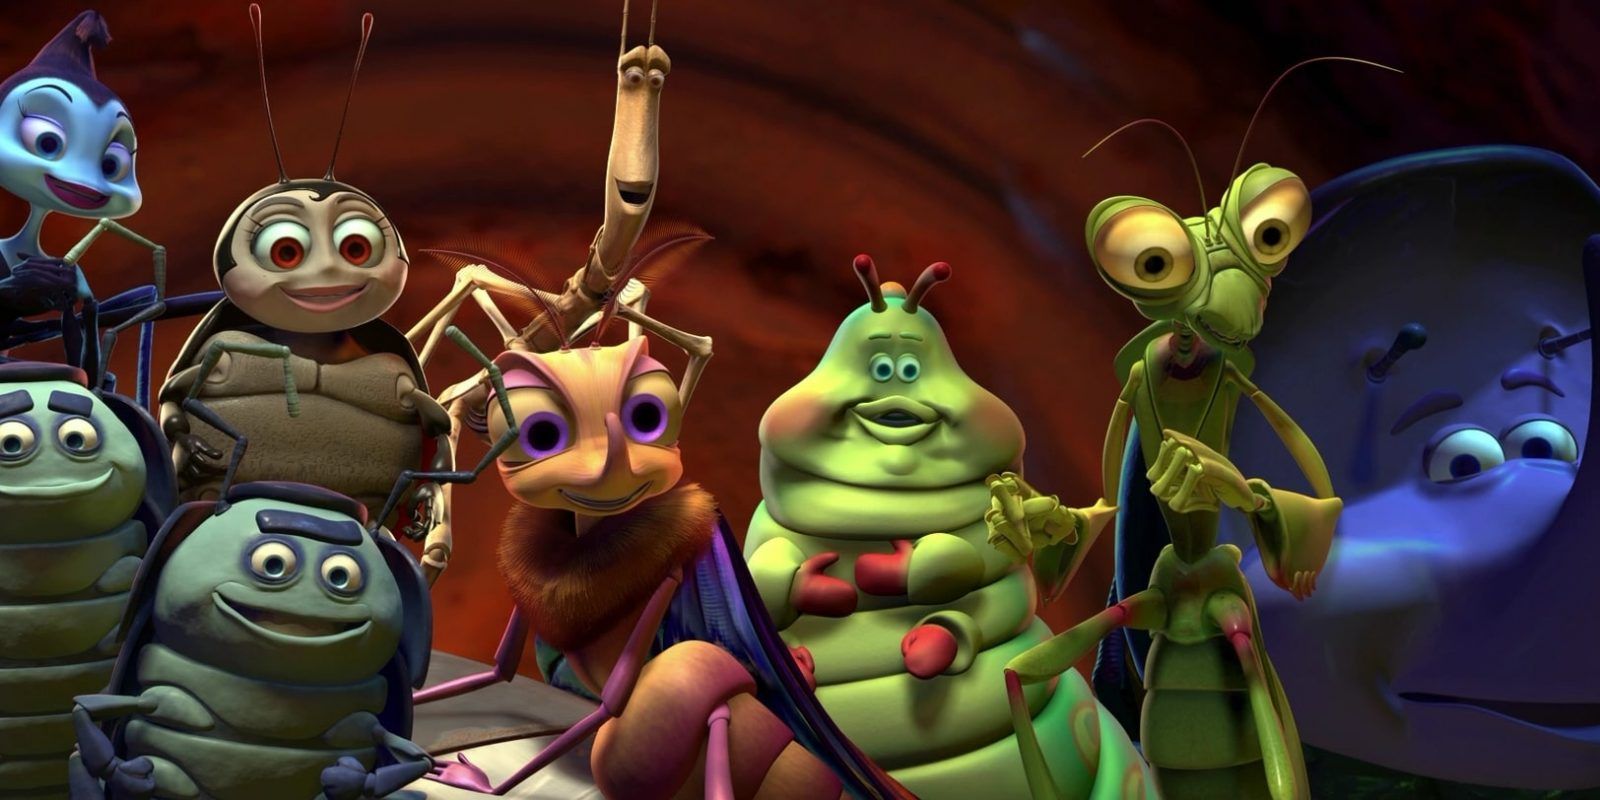 Circus bugs from A Bug's Life